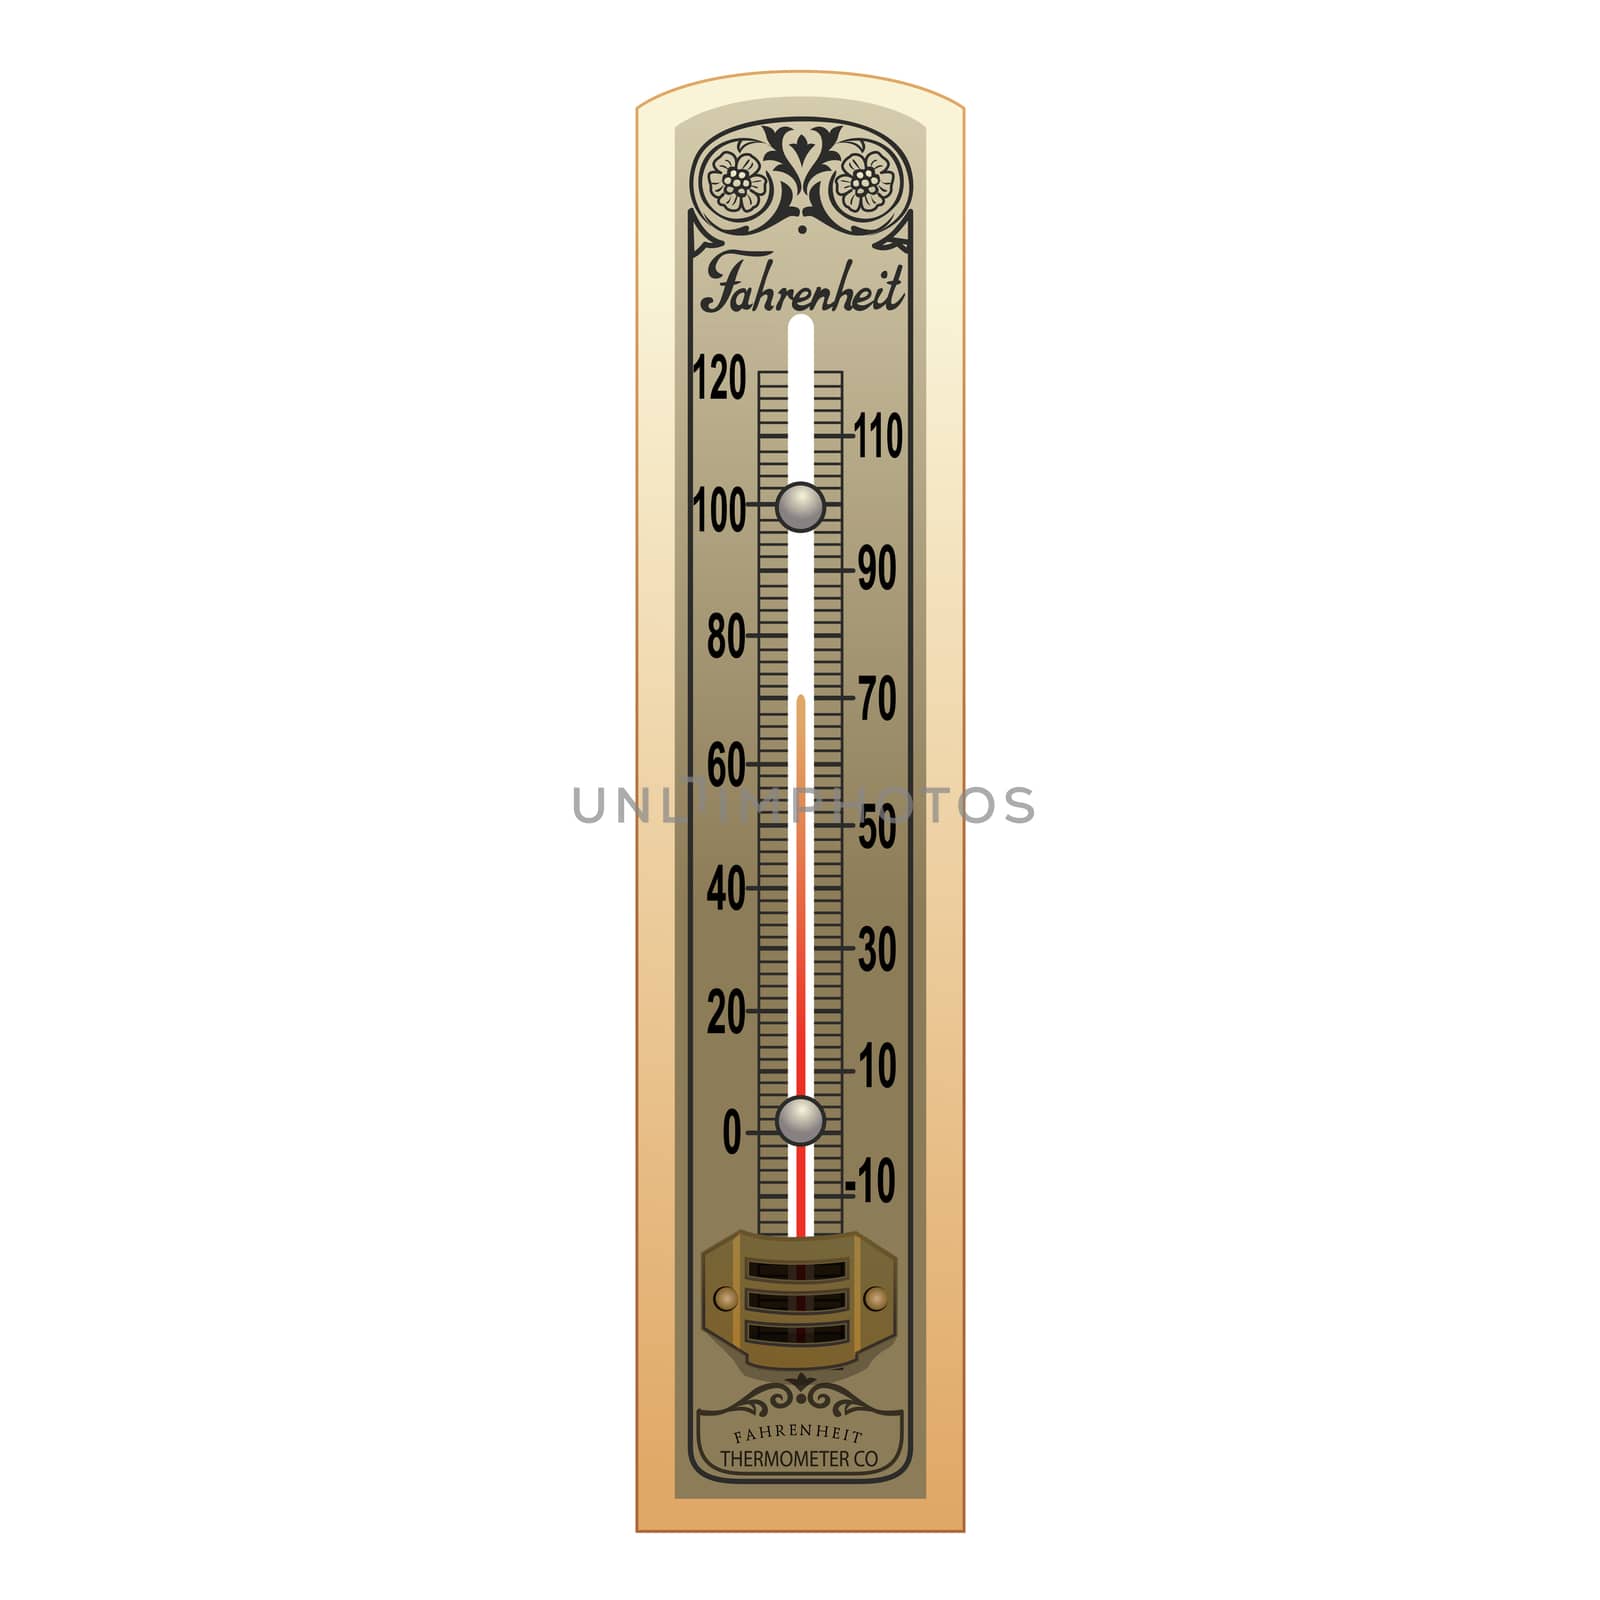 Old Thermometer Illustration by ConceptCafe